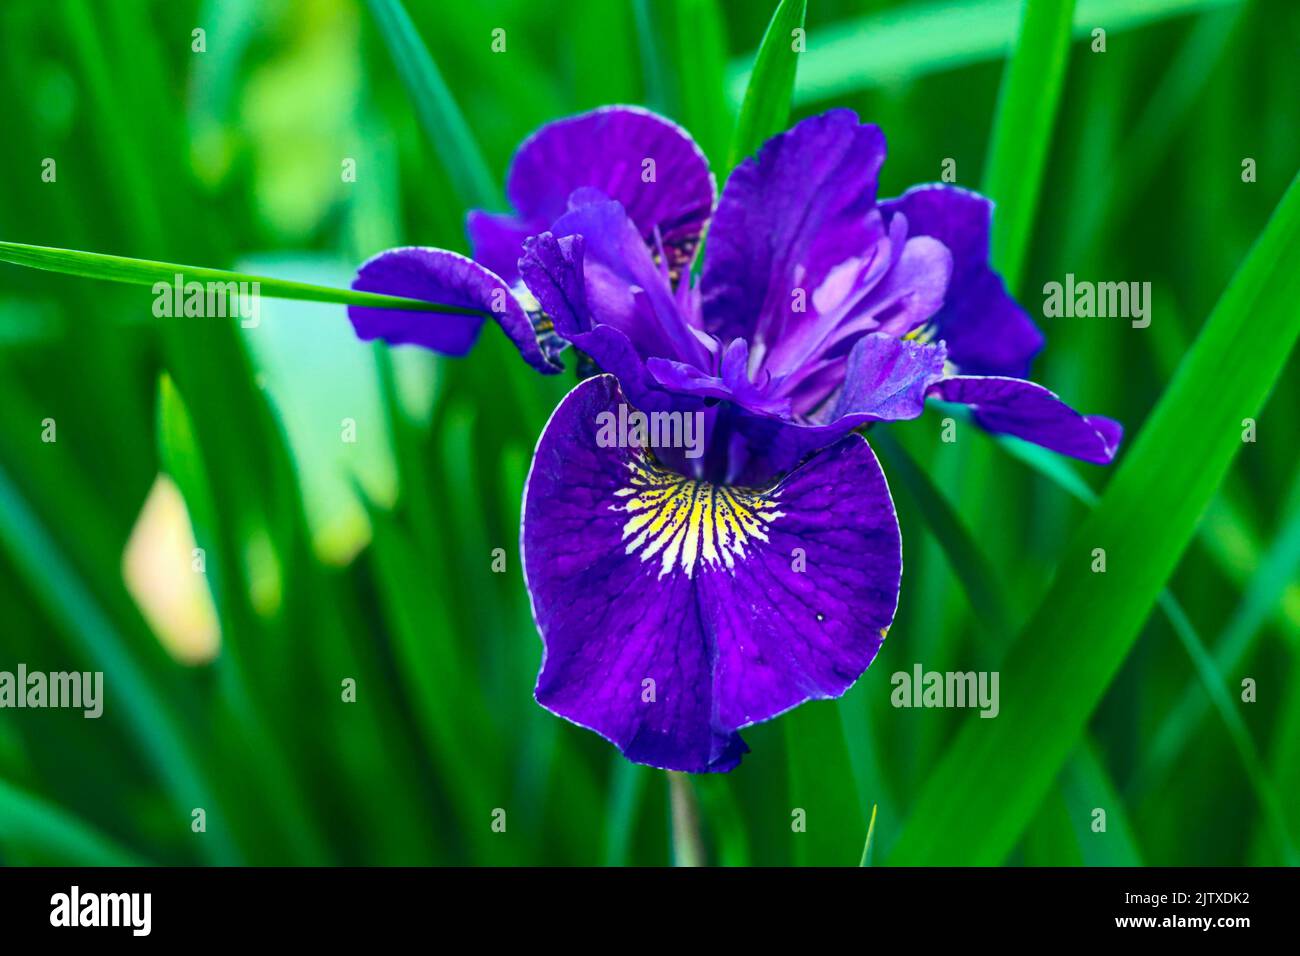 A single blue iris flower seen at Butchart Gardens located in Brentwood Bay, British Columbia, Canada. Stock Photo